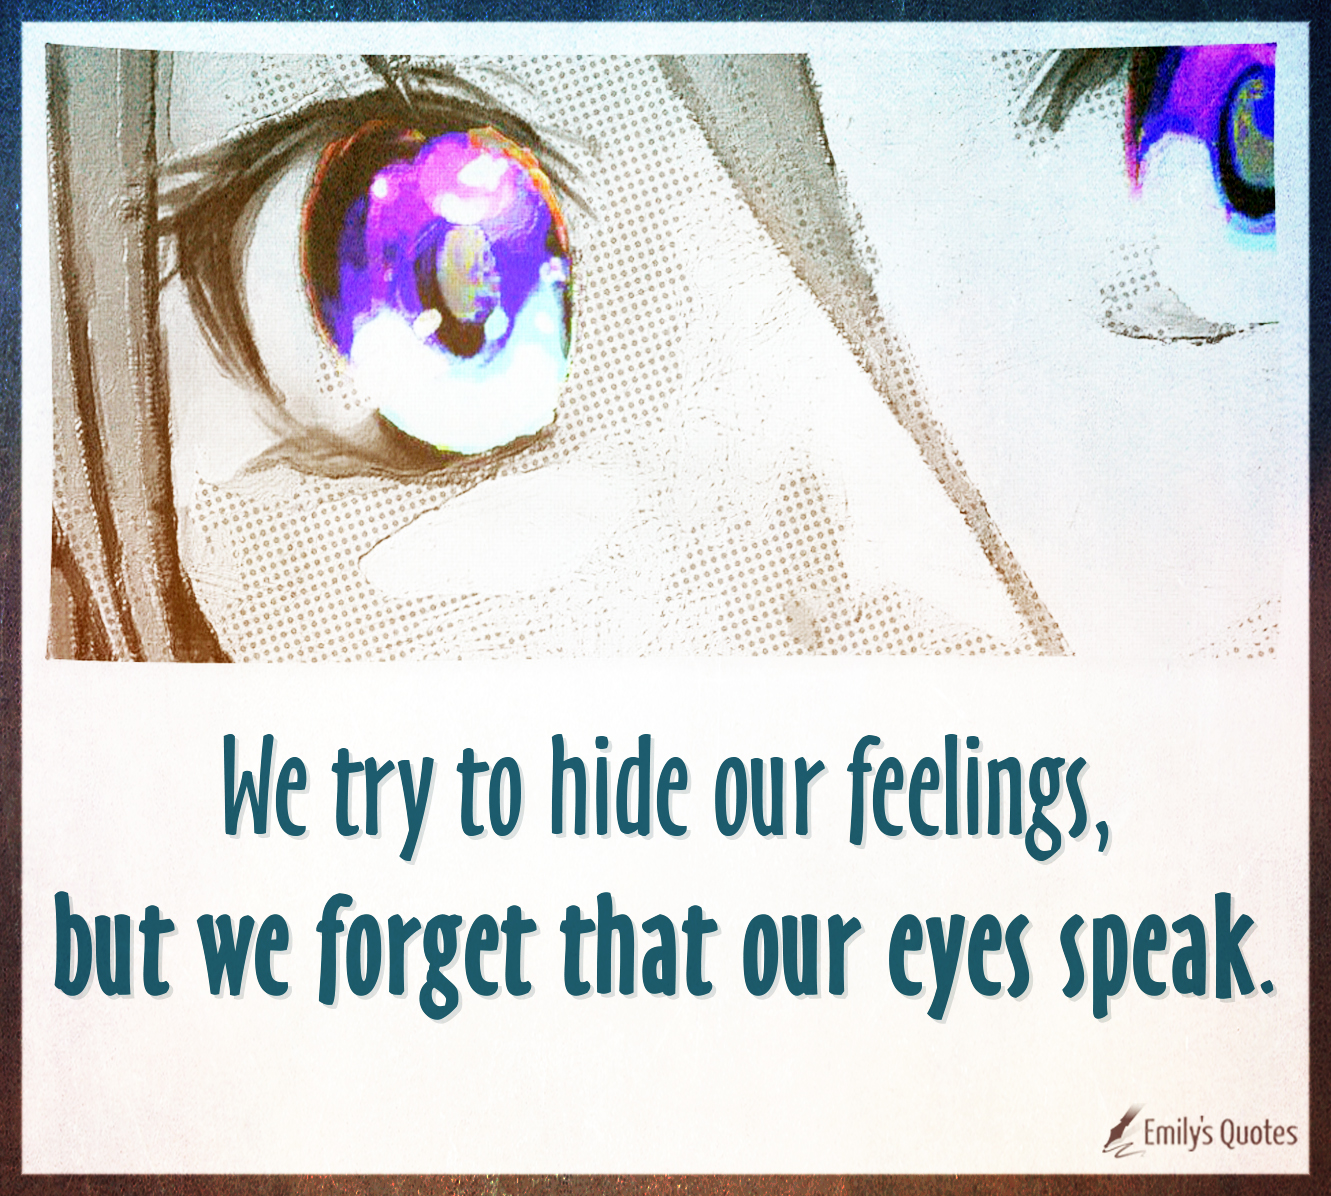 We try to hide our feelings, but we forget that our eyes speak